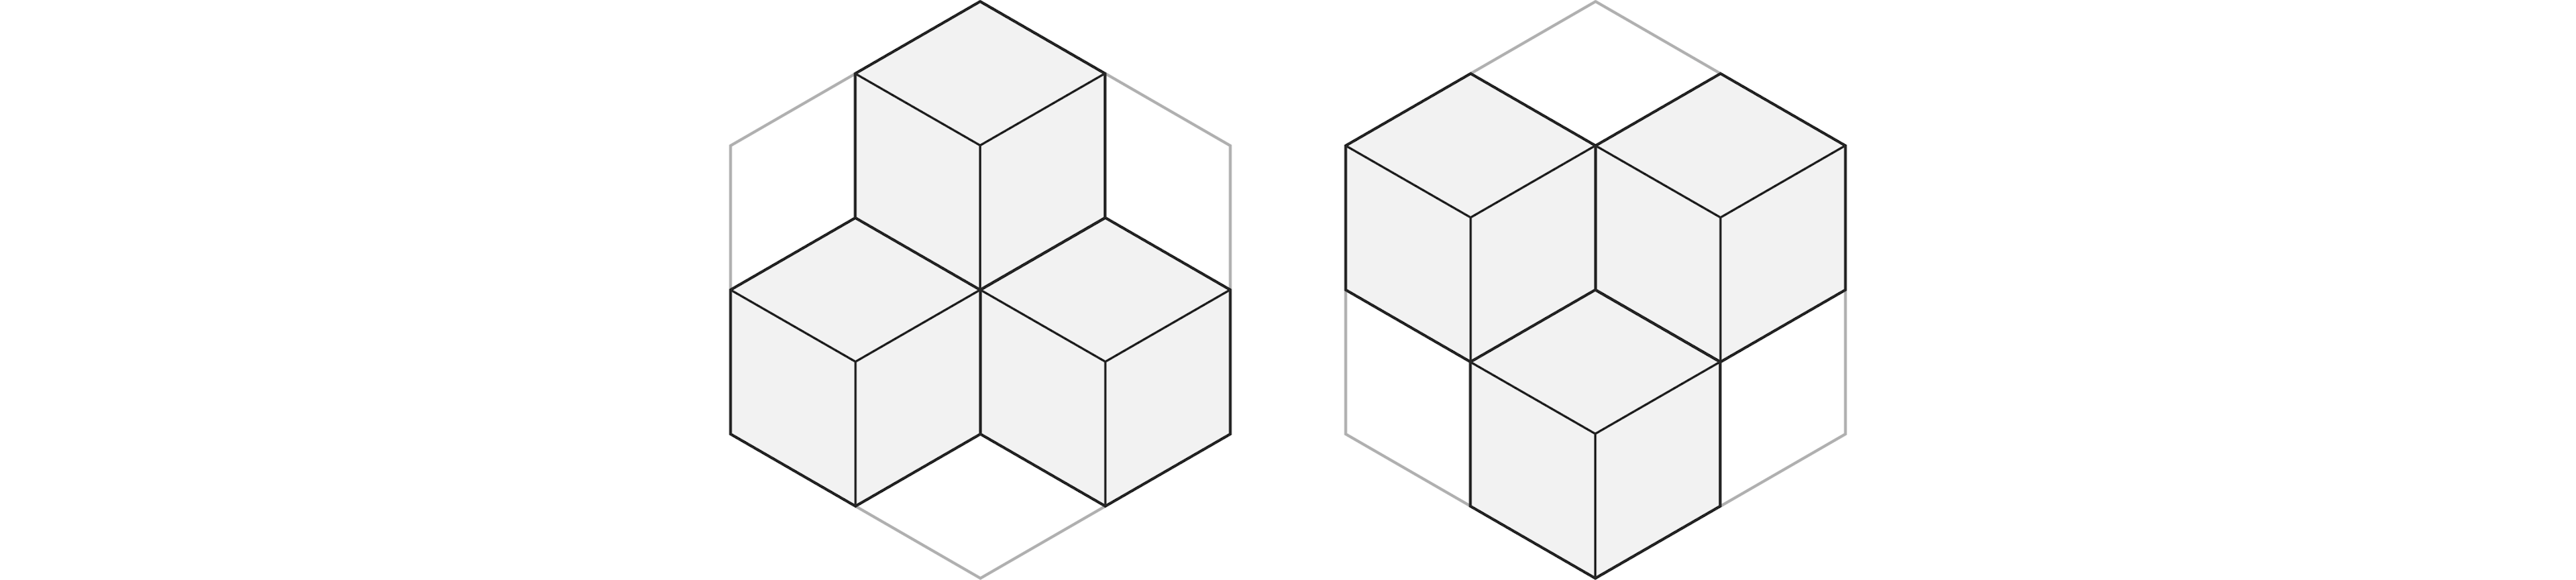 Figure 2 - two subdivision patterns